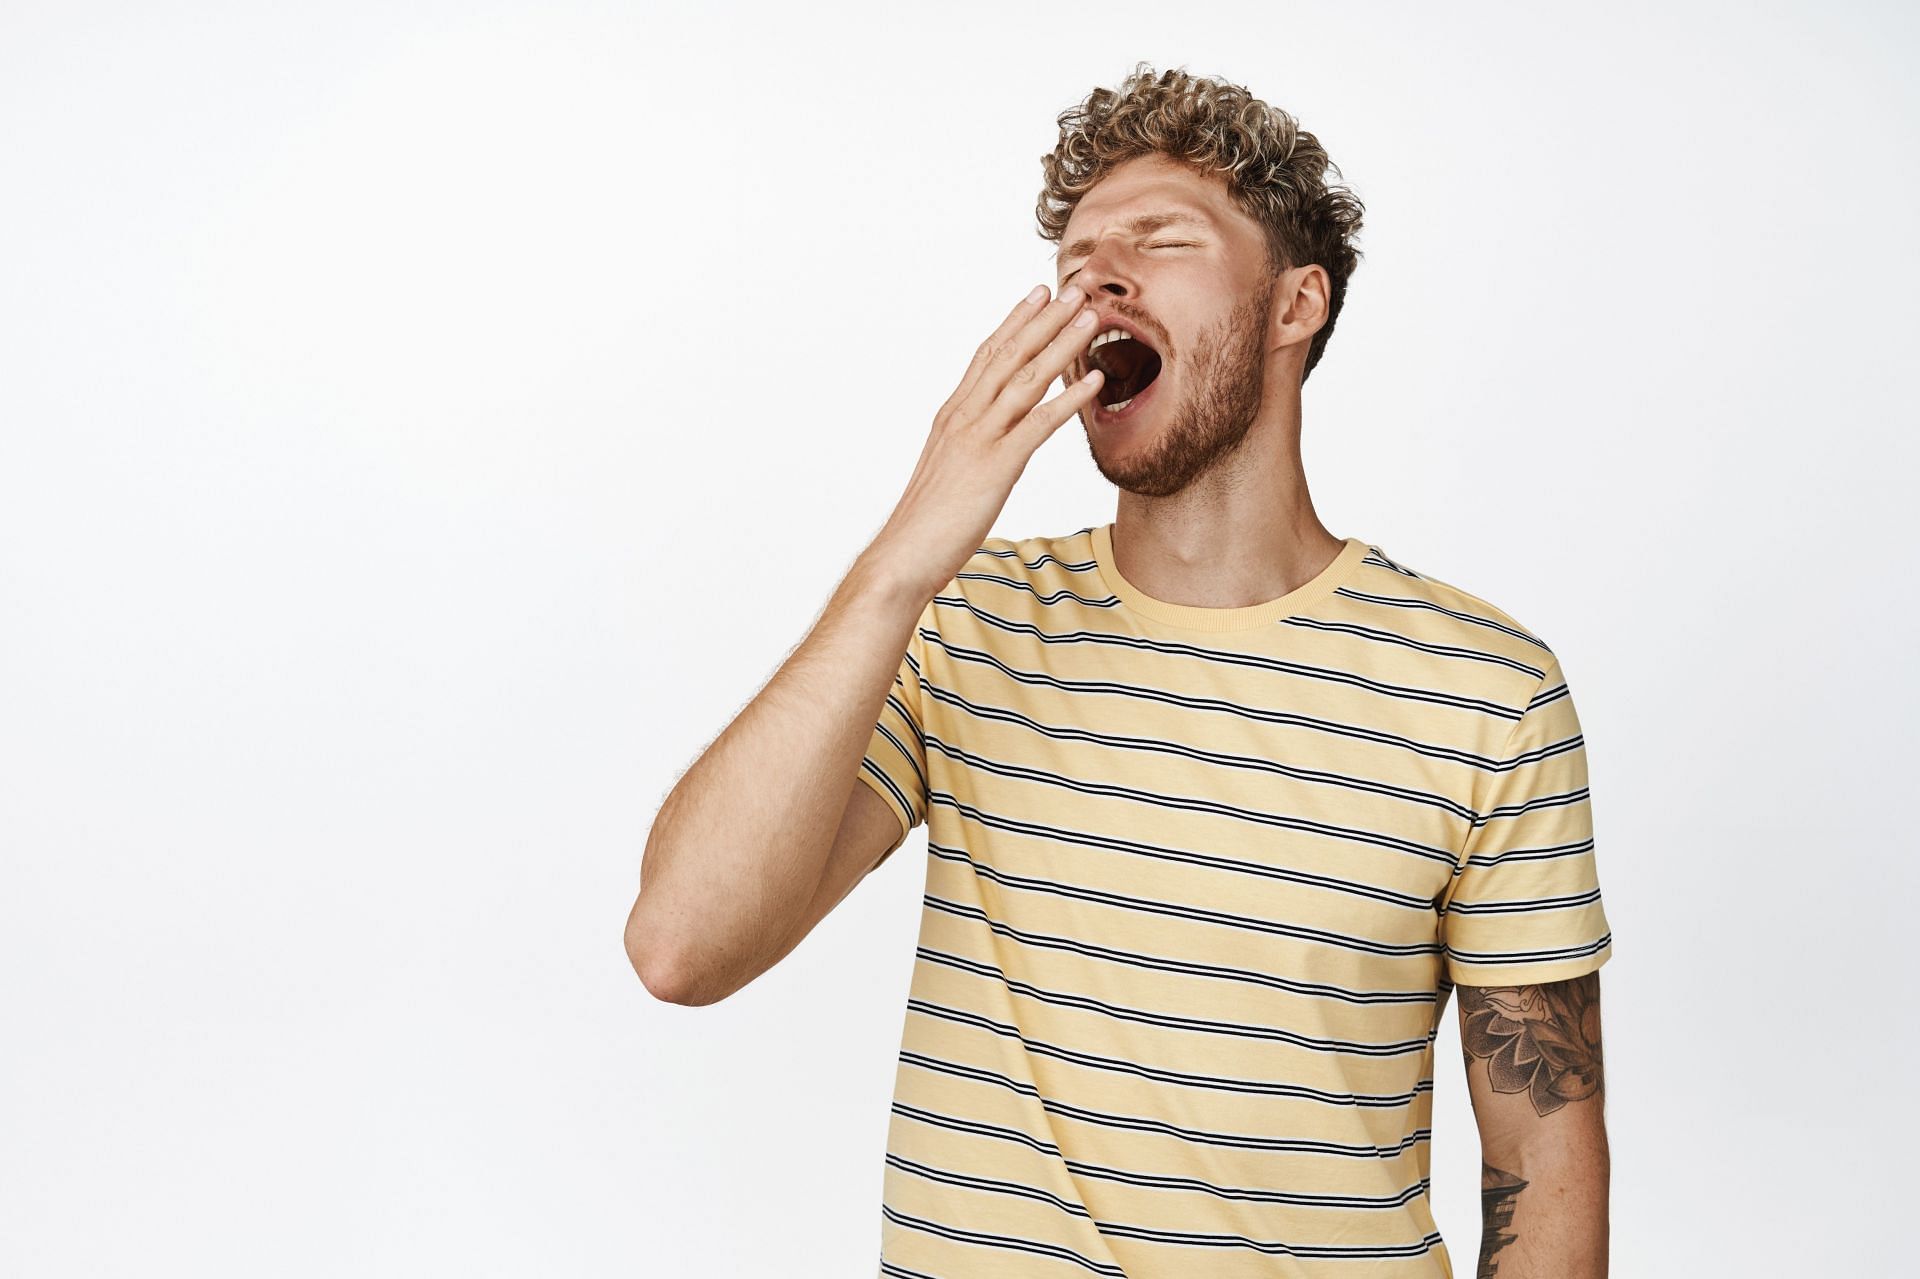 A person with these traits is likely to show a low yawning. (Image via Pexels/Cottonbro studio)